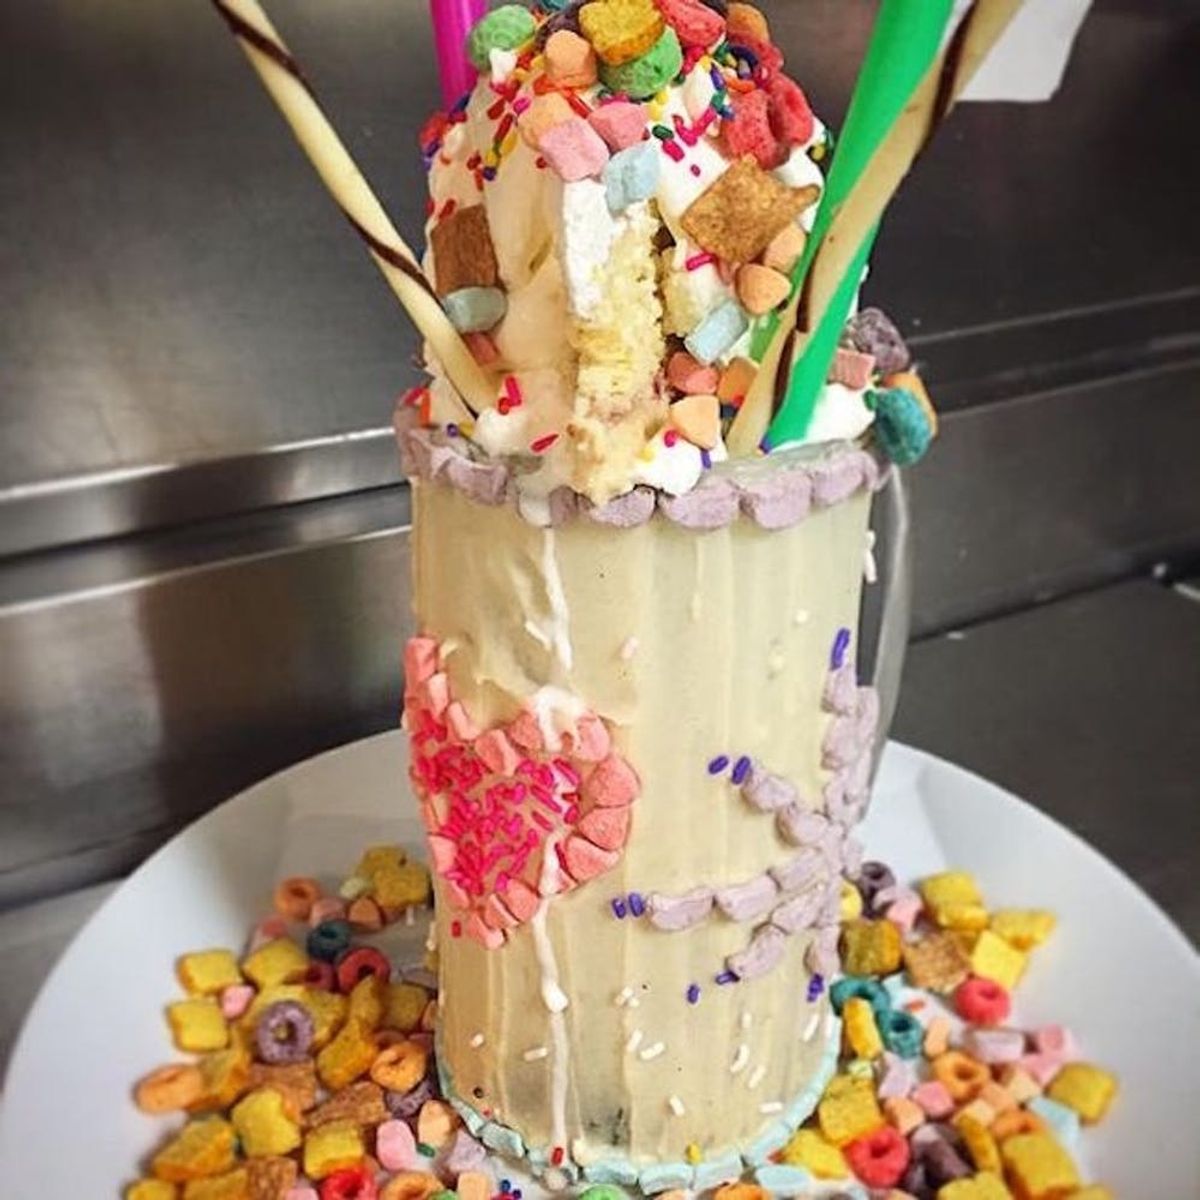 These 15 INSANE Freakshakes and Cocktails Will Blow Your Mind